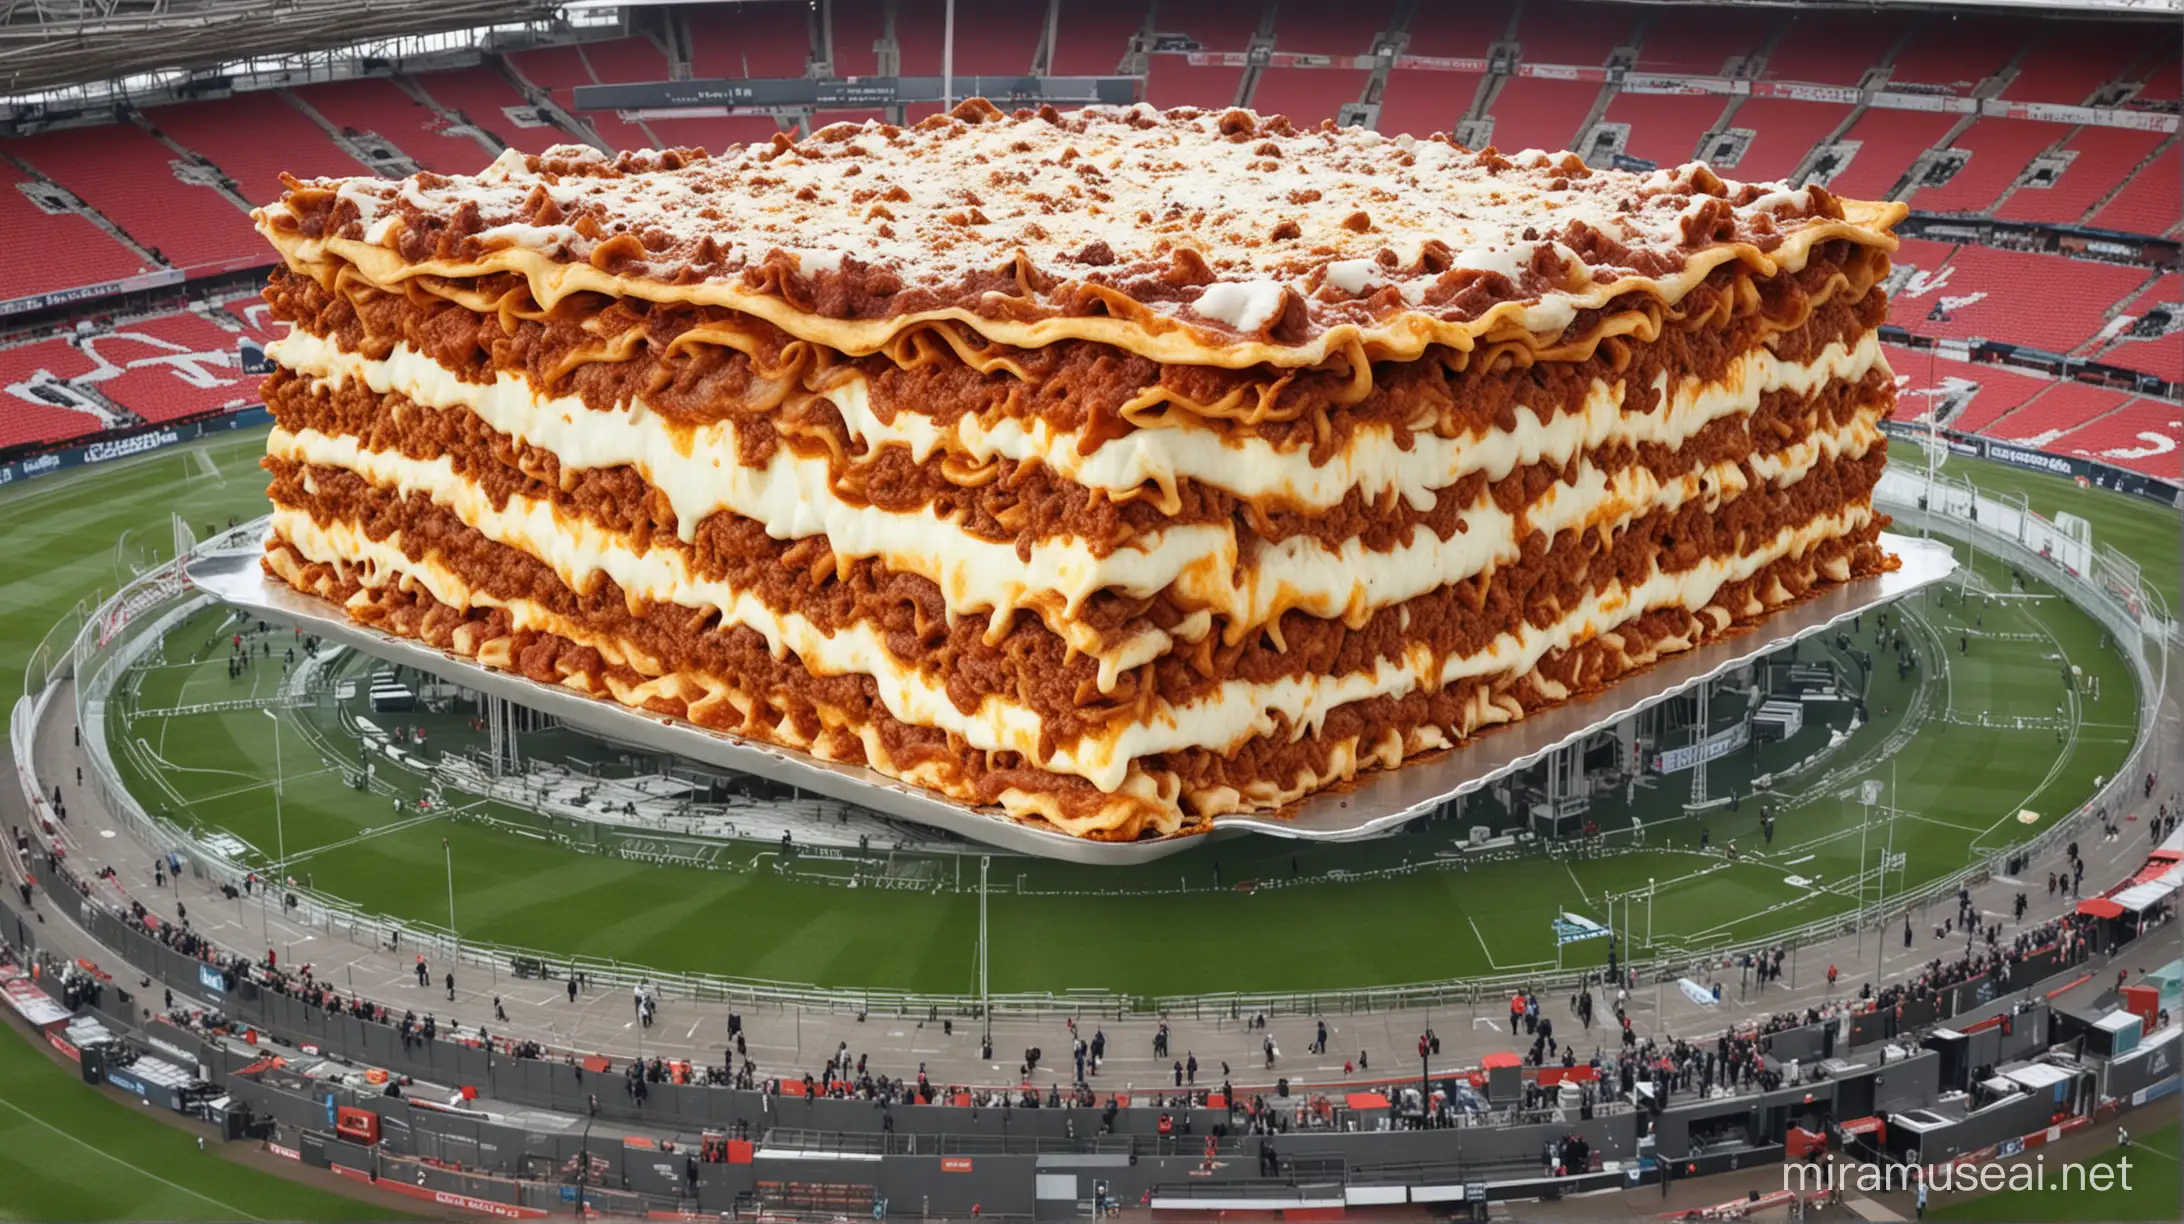 show me a realistic shot of the biggest lasagna ever made which is takes over all of Wembley Stadium grounds